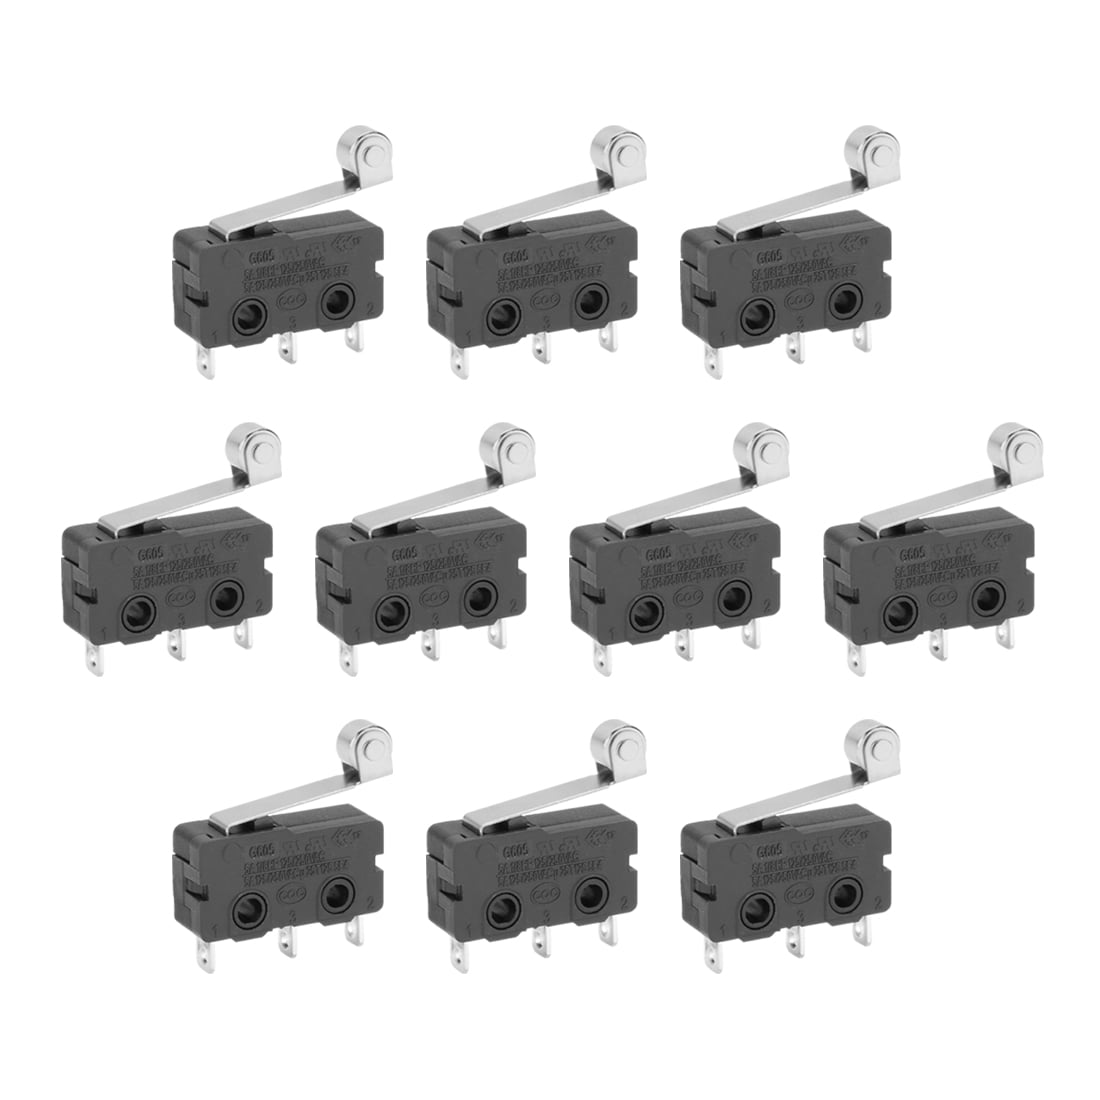 8 pc TEMCo Micro Limit Switch Roller Arm Subminiature SPDT Snap Action LOT 